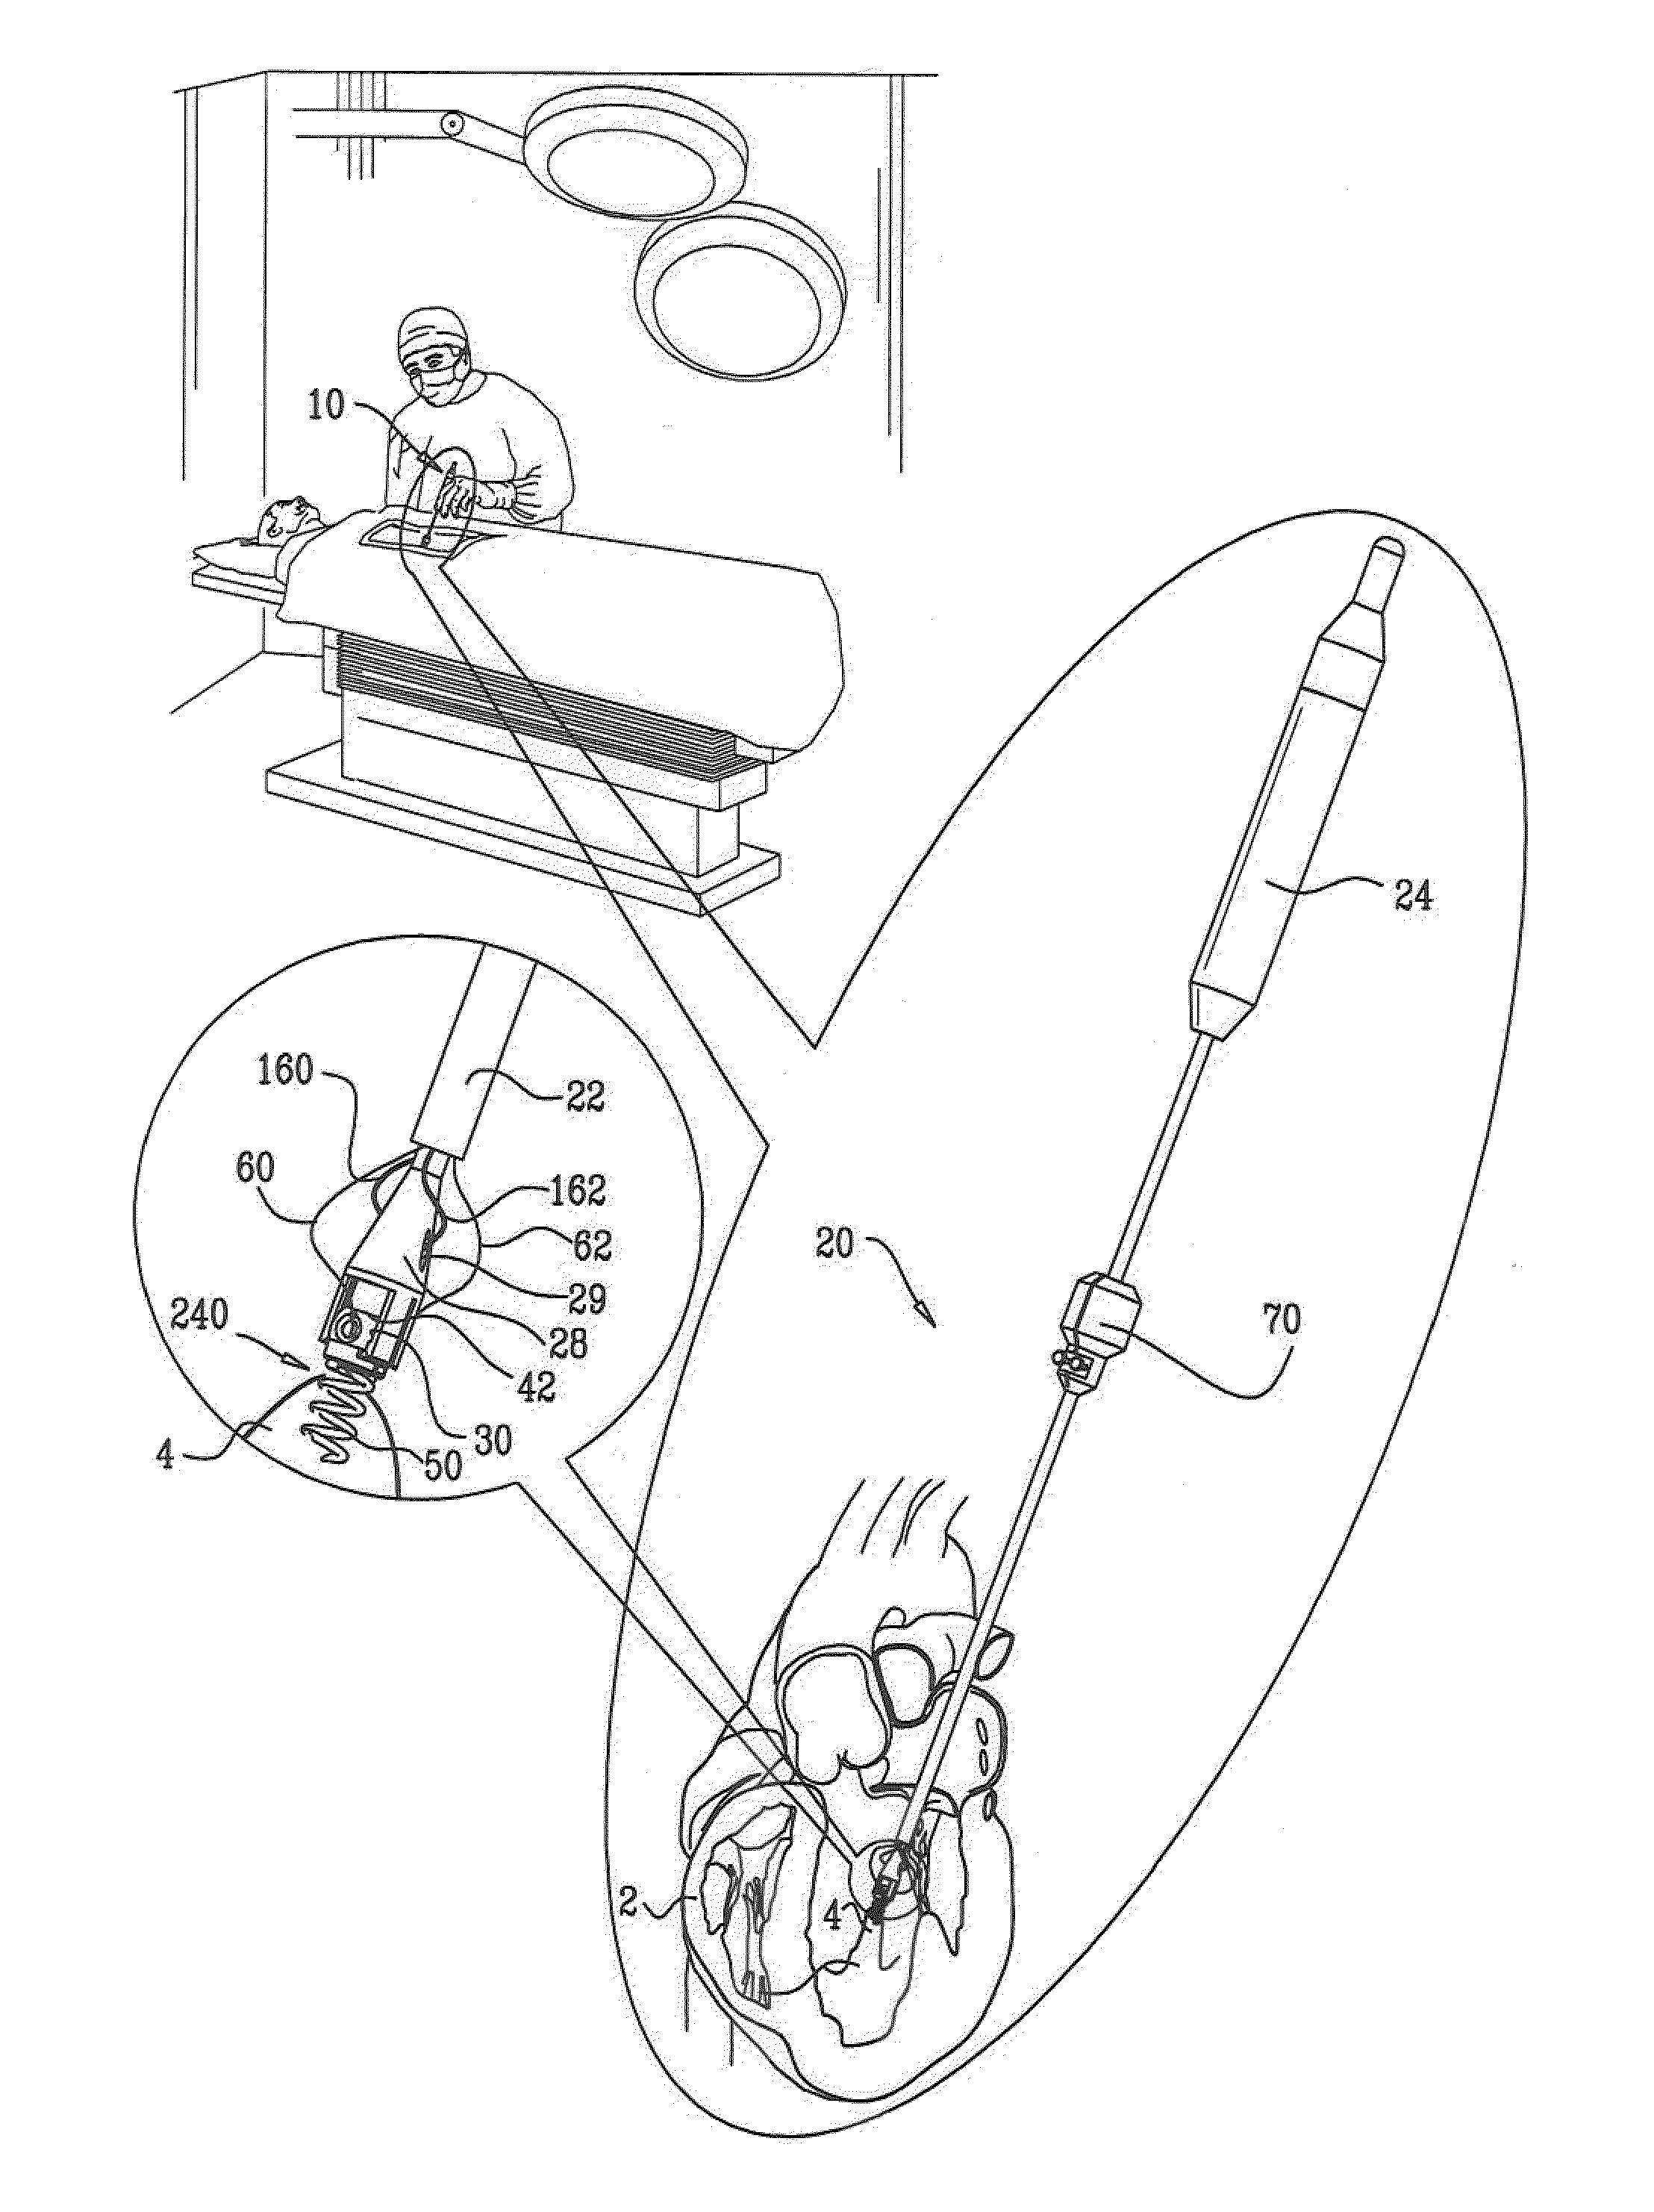 Adjustable repair chords and spool mechanism therefor